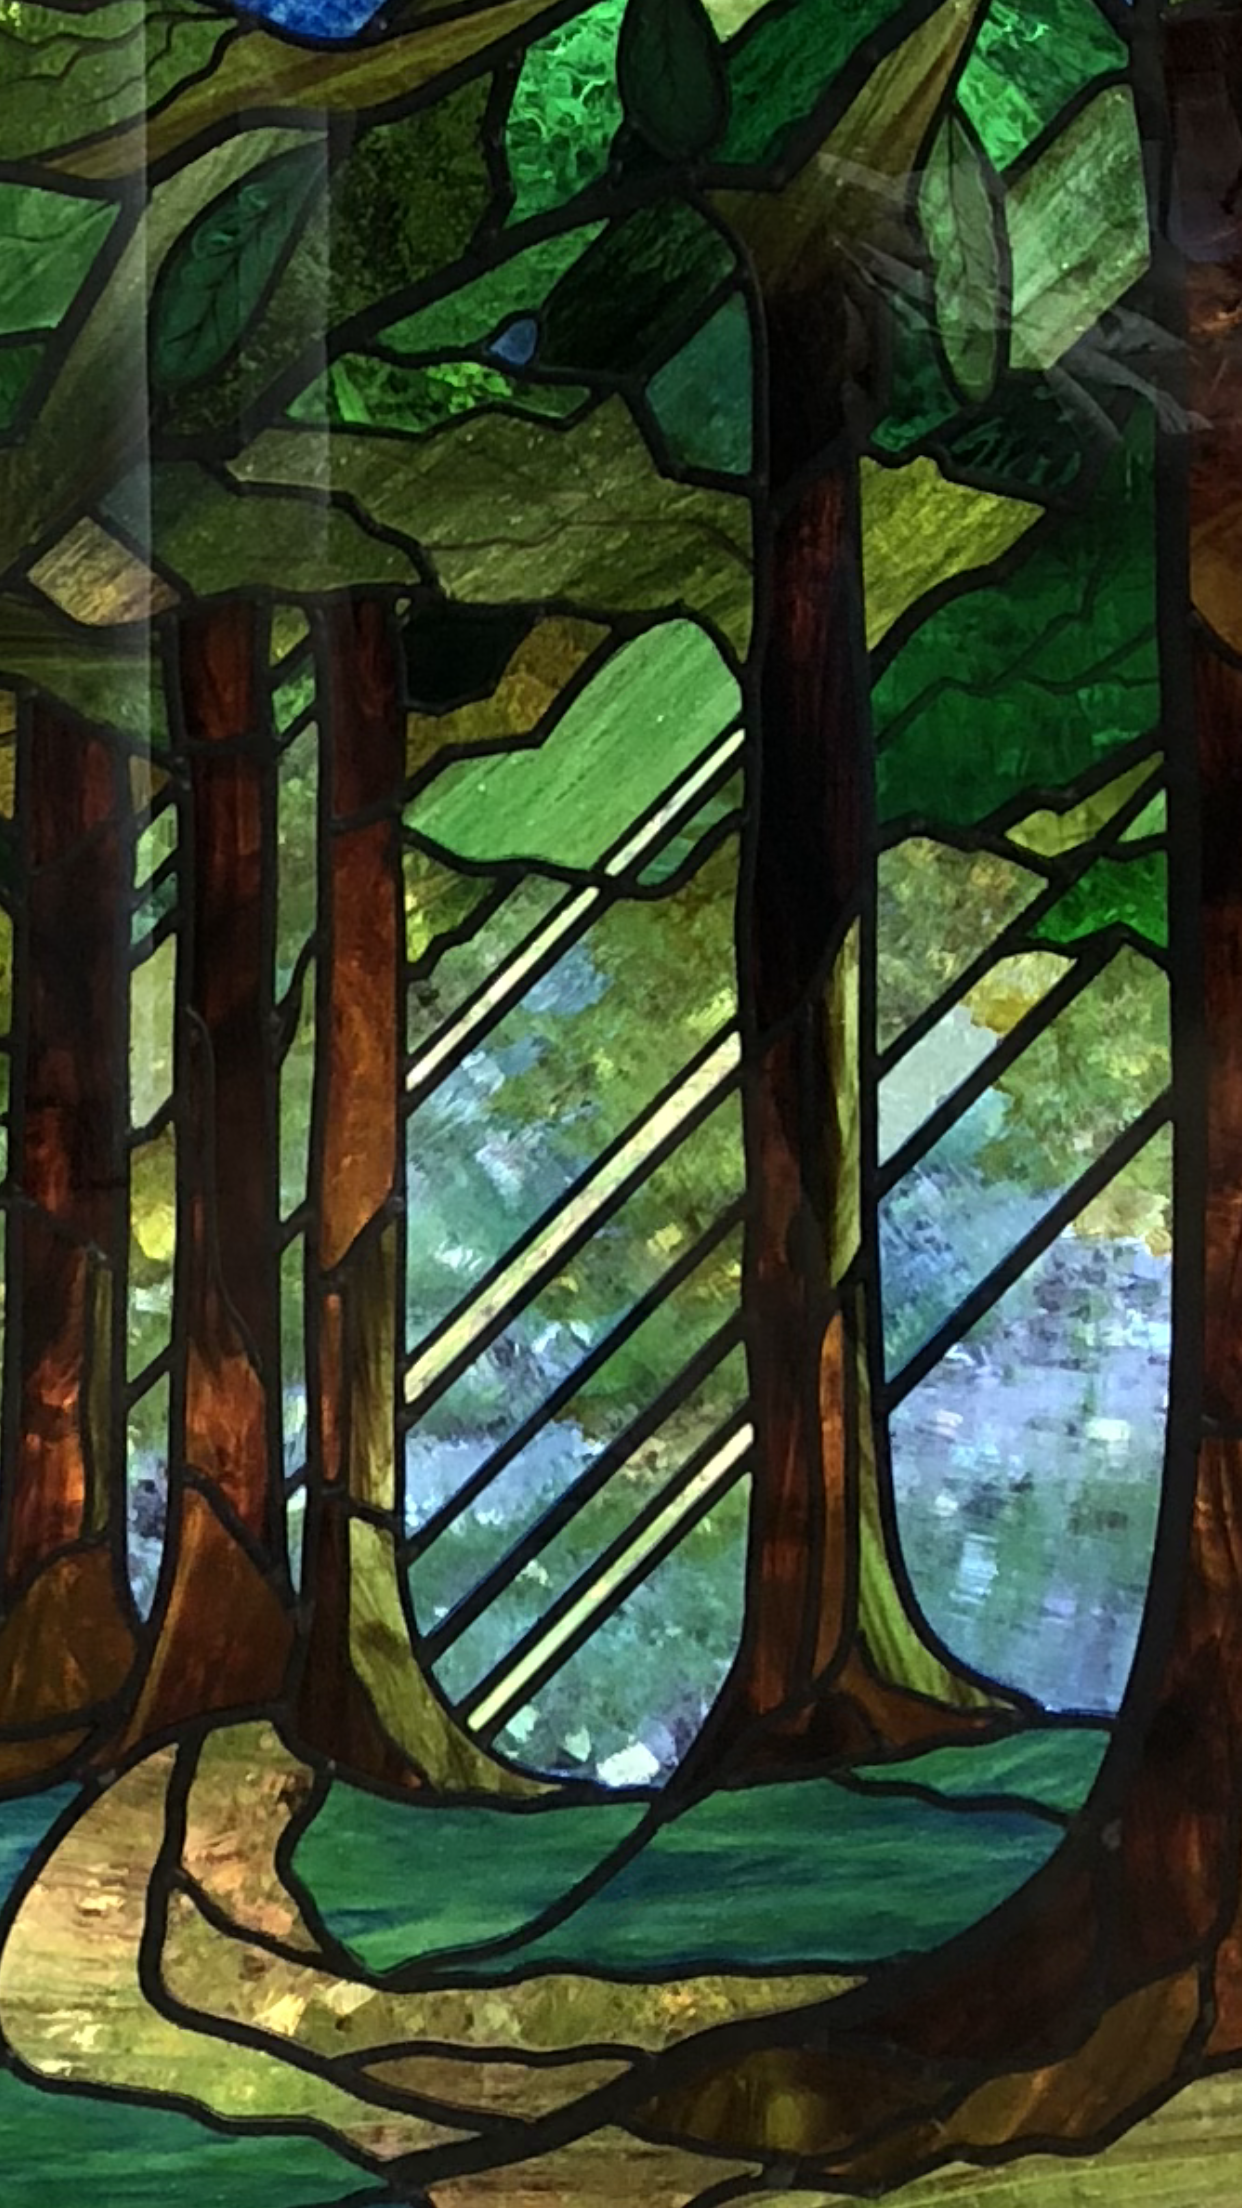 Pin by keagan michael on projects to try modern stained glass making stained glass stained glass panels